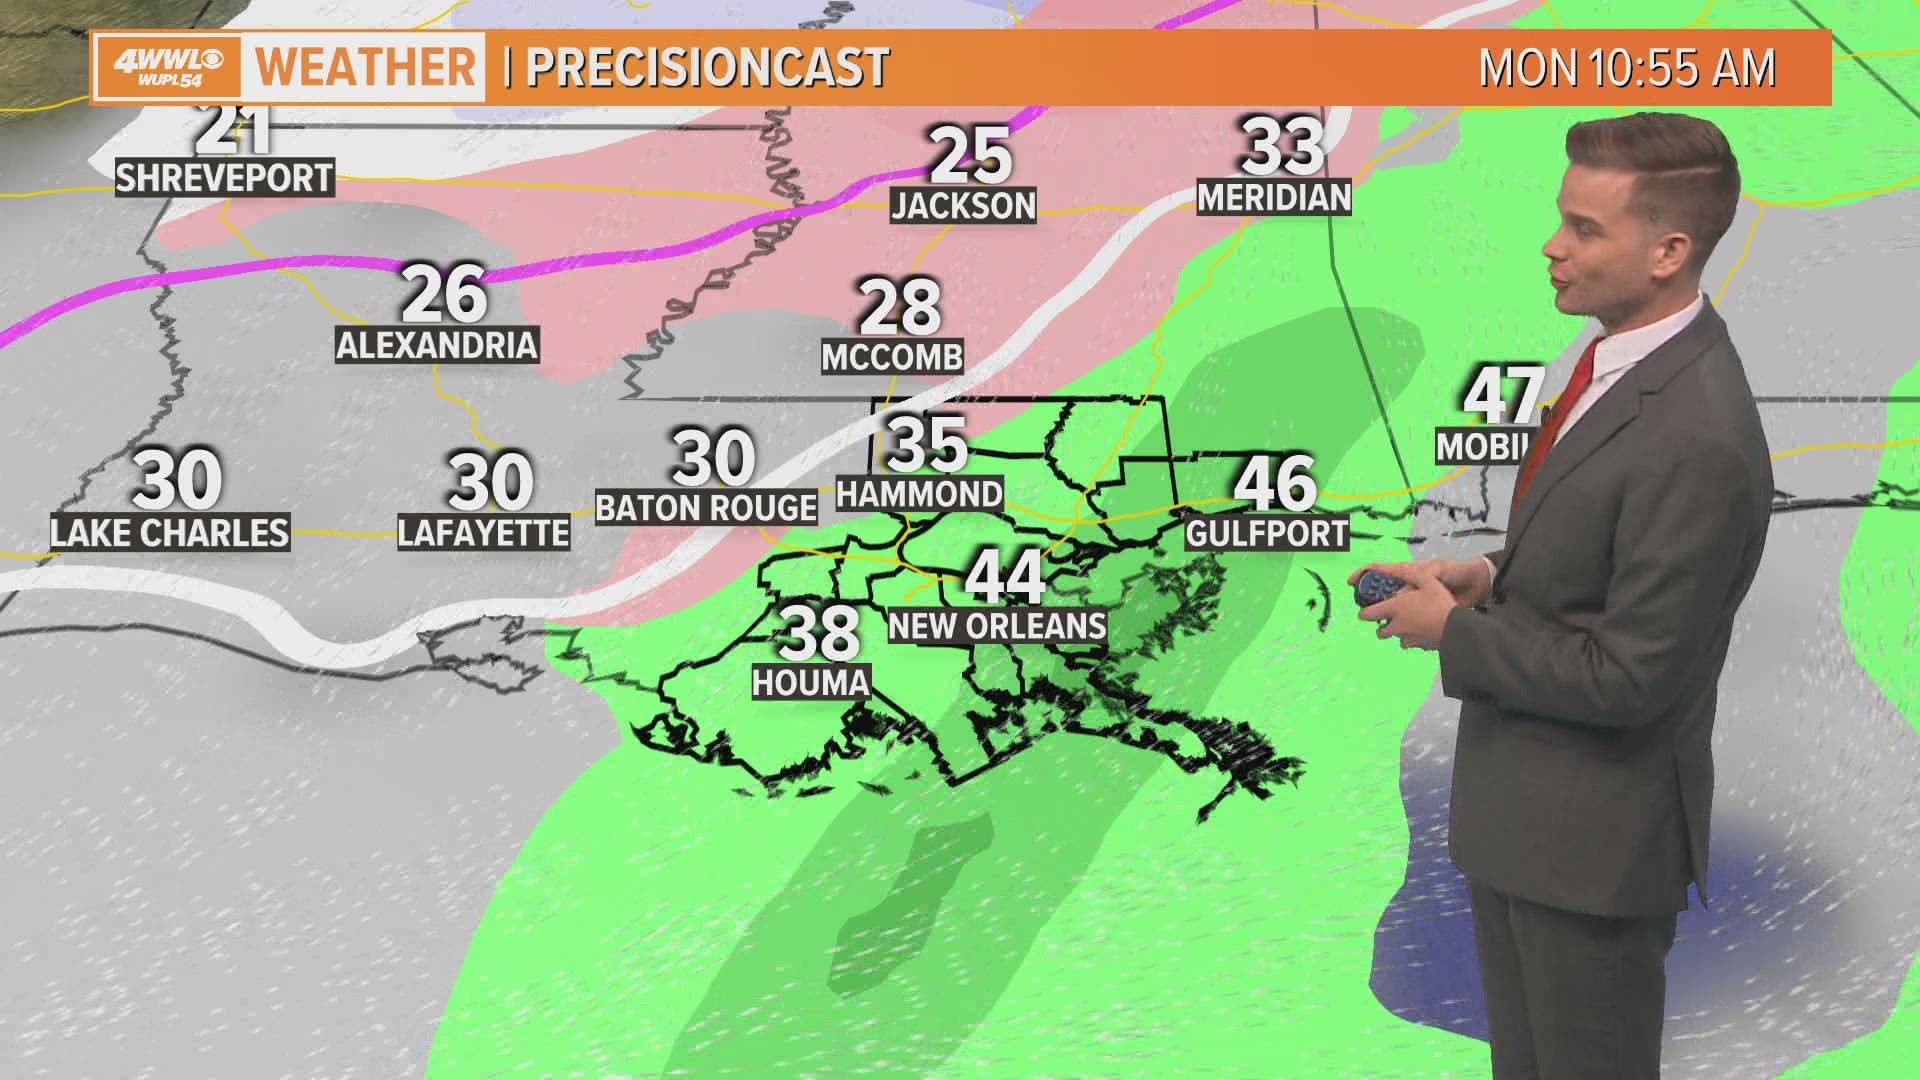 A hard freeze is forecast for areas outside of the New Orleans metro Tuesday morning.